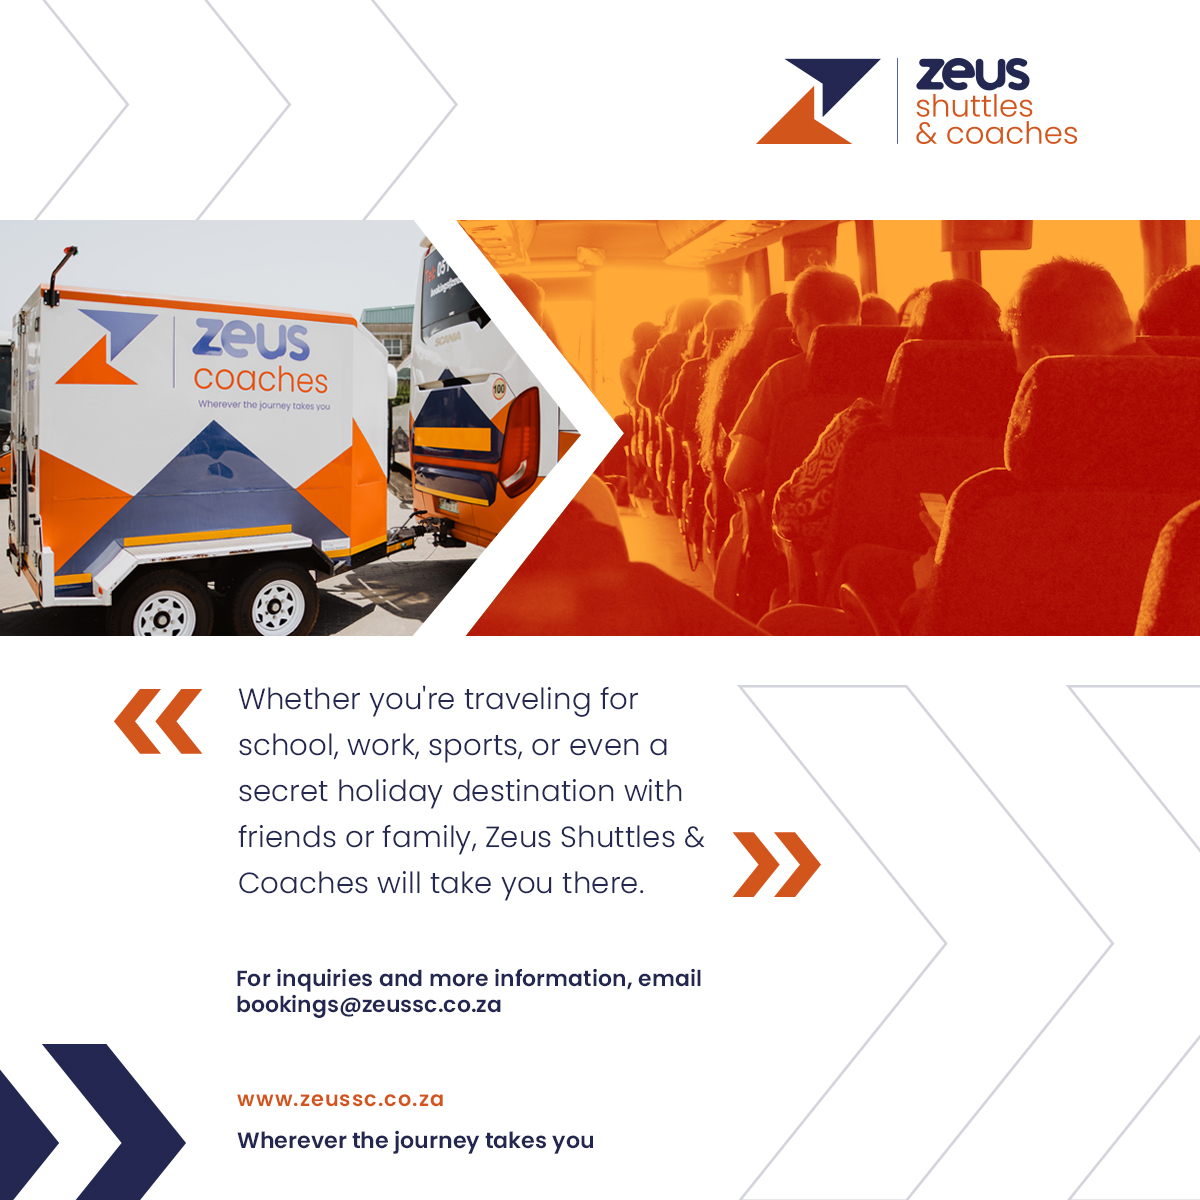 There is a shuttle for every need, whether you need to transport a large group or go the distance, we got you covered.

Send all your bookings and inquiries to: Bookings@zeussc.co.za

#transportation #shuttleservice #shuttlebus #travelcoach #traveling  #longdistancetravel